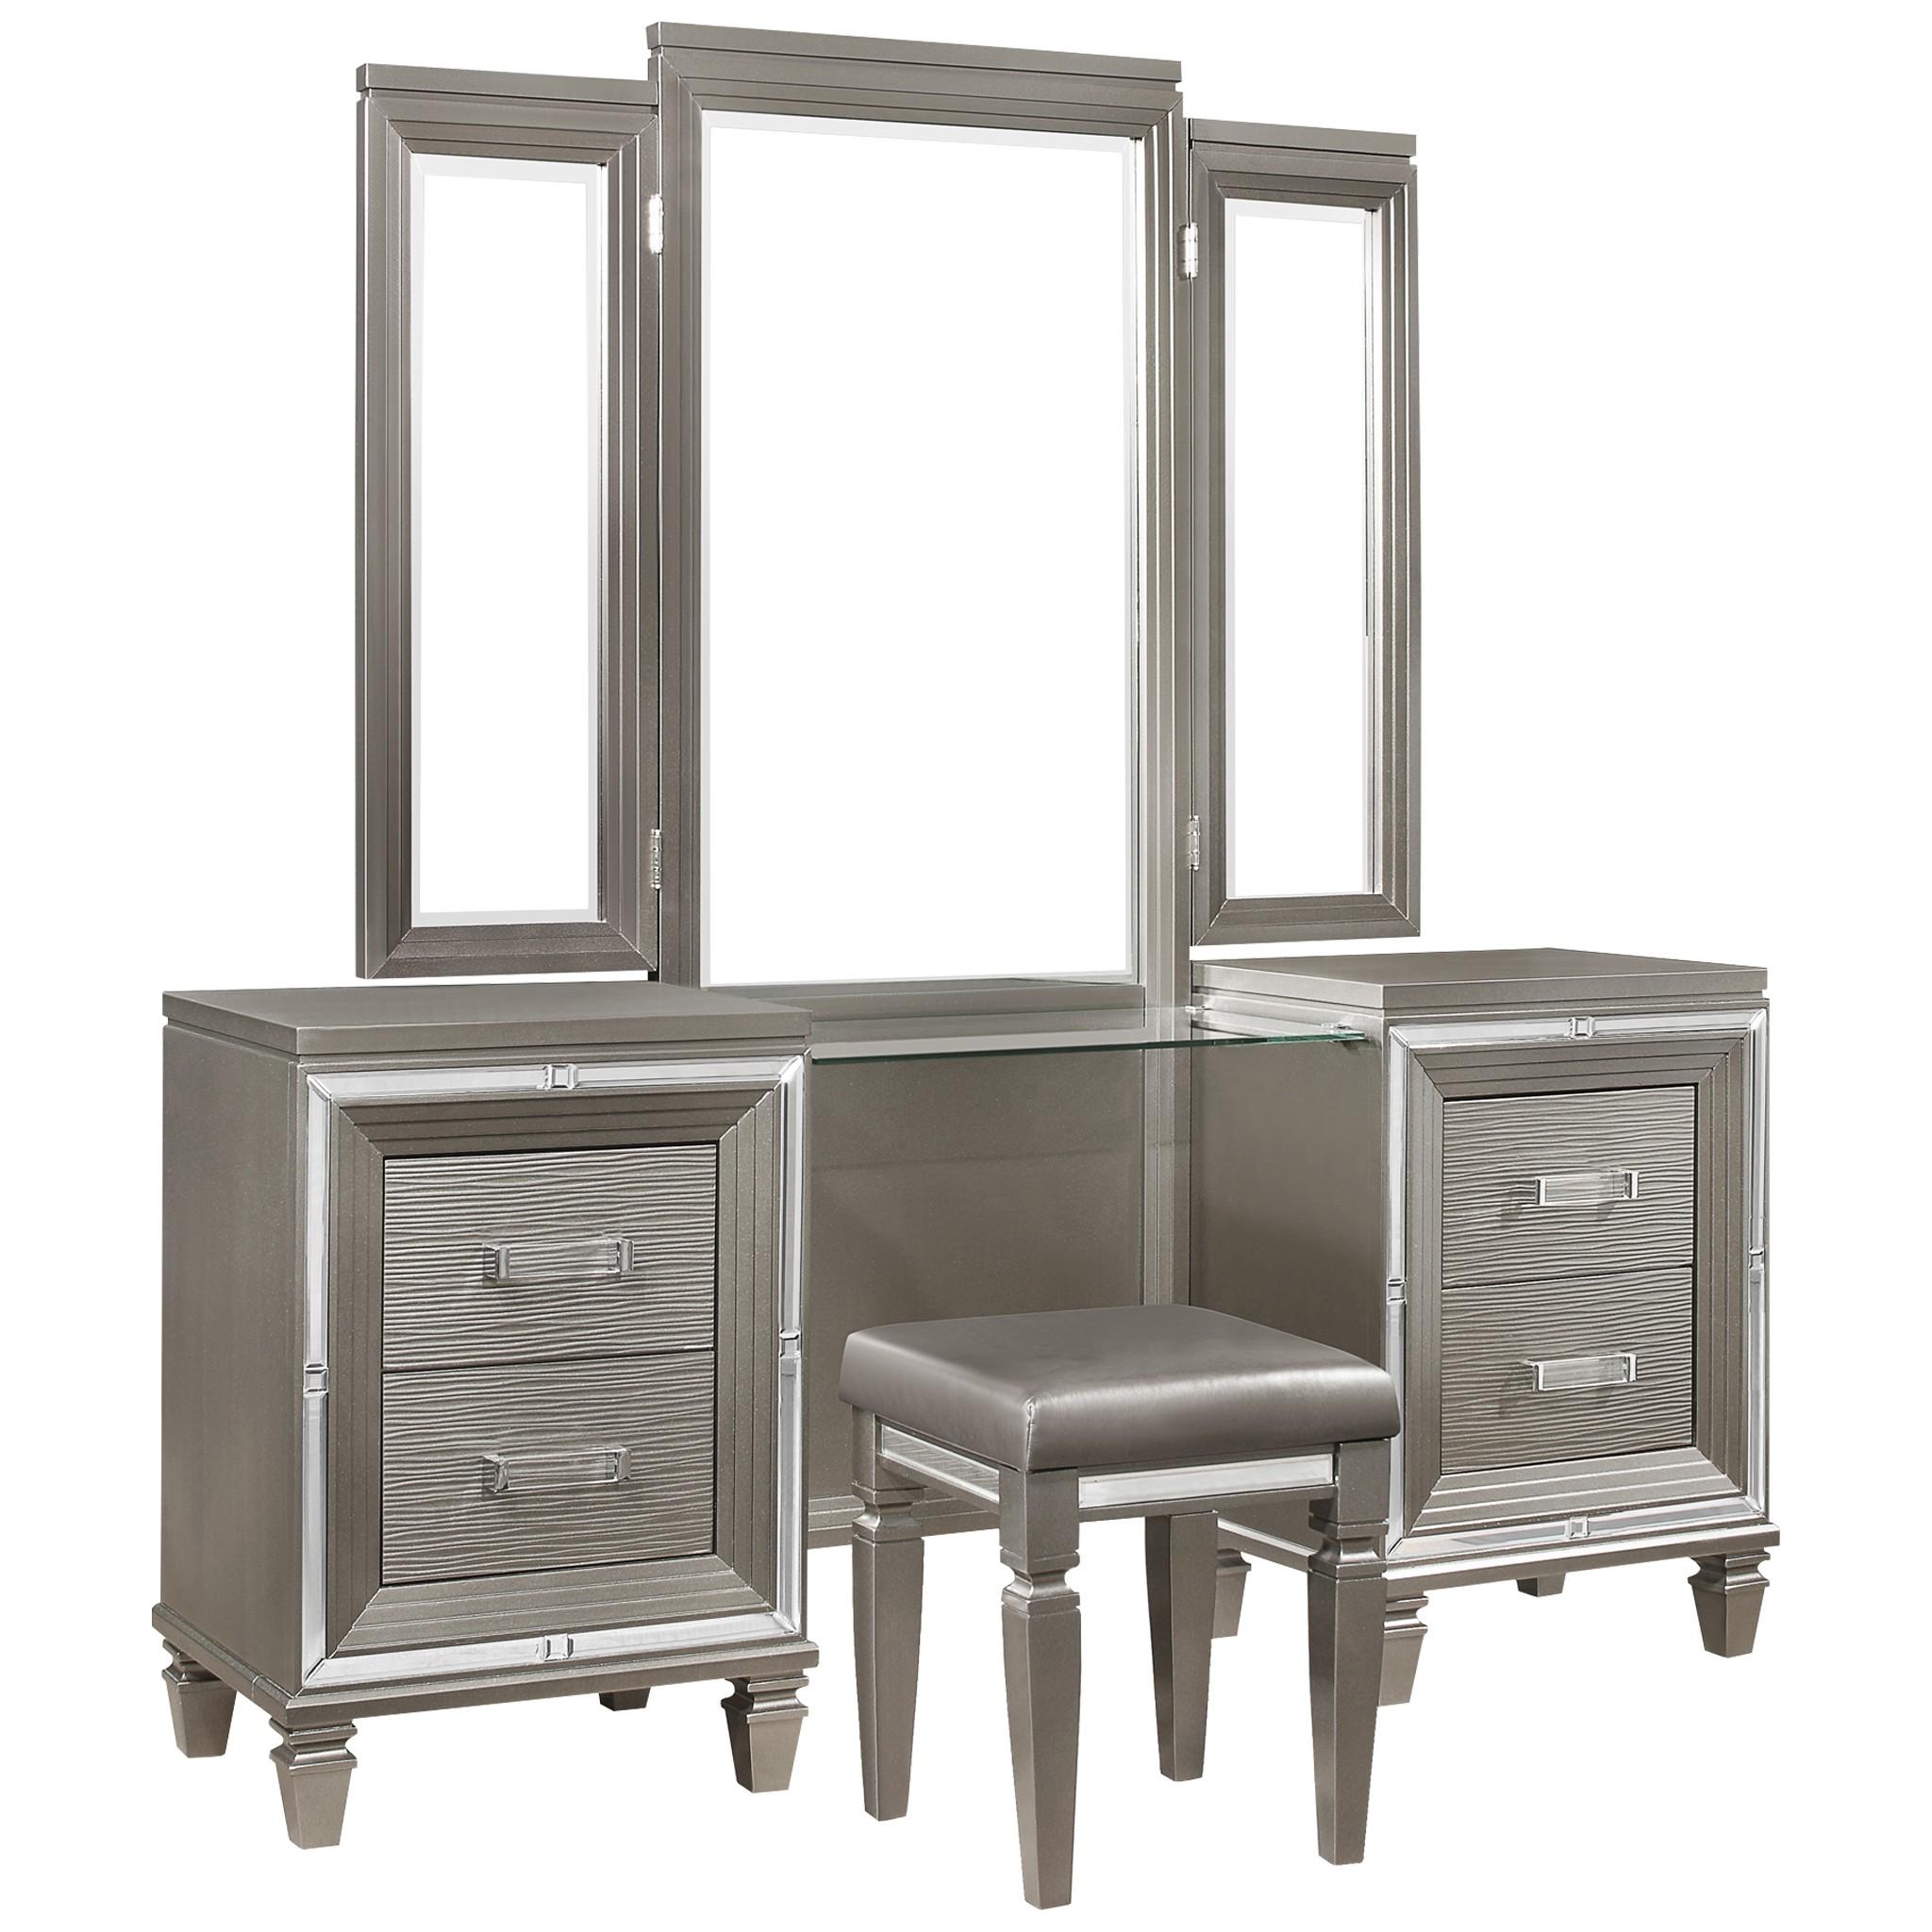 Modern Vanity Set 1616-14*15-3PC Tamsin 1616-14*15-3PC in Silver Faux Leather